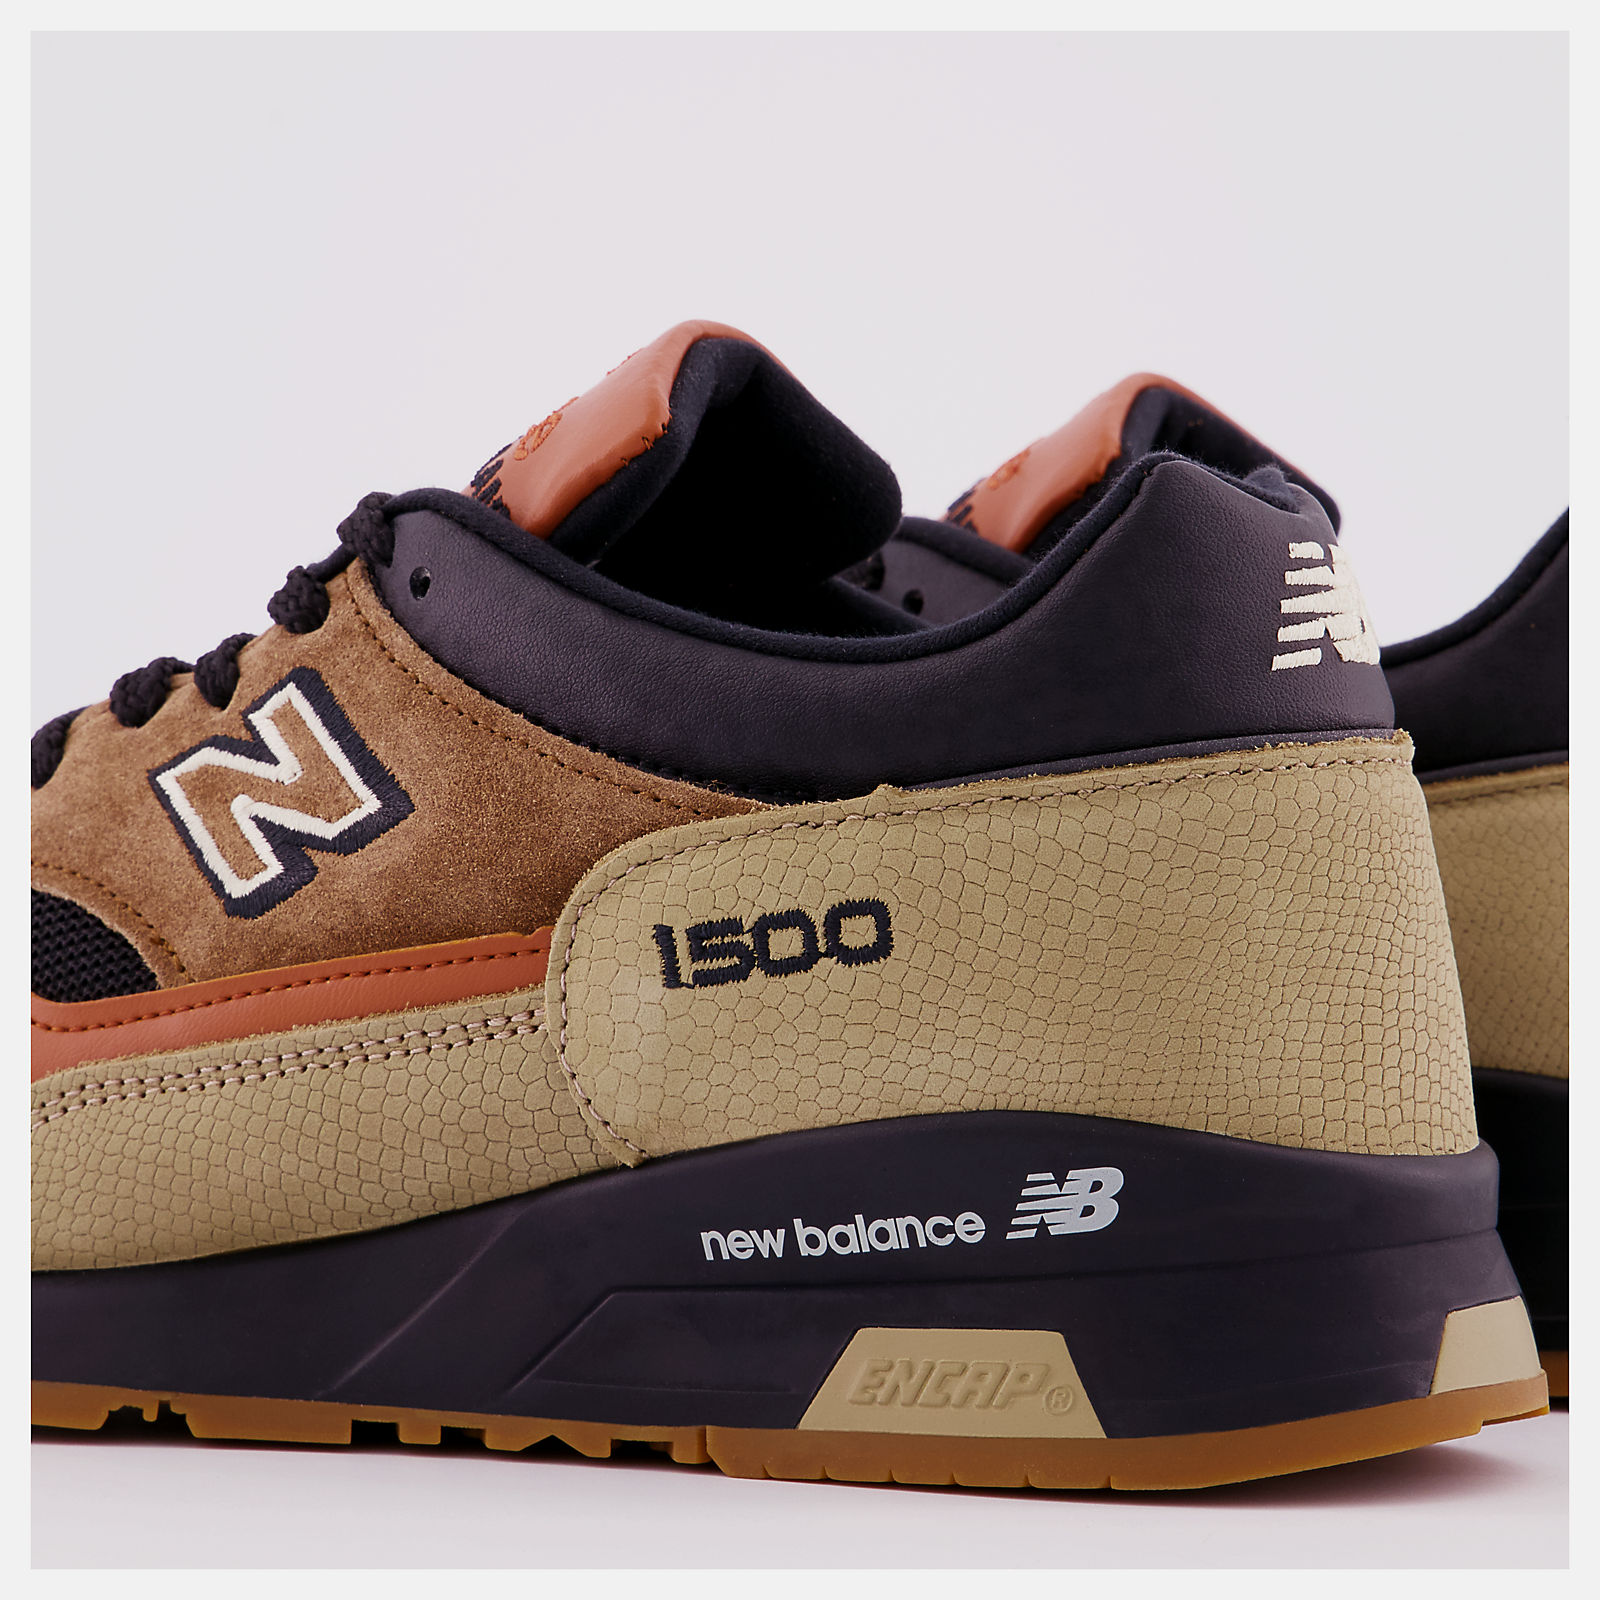 Hoelahoep Pef Email schrijven Made in UK 1500 - New Balance